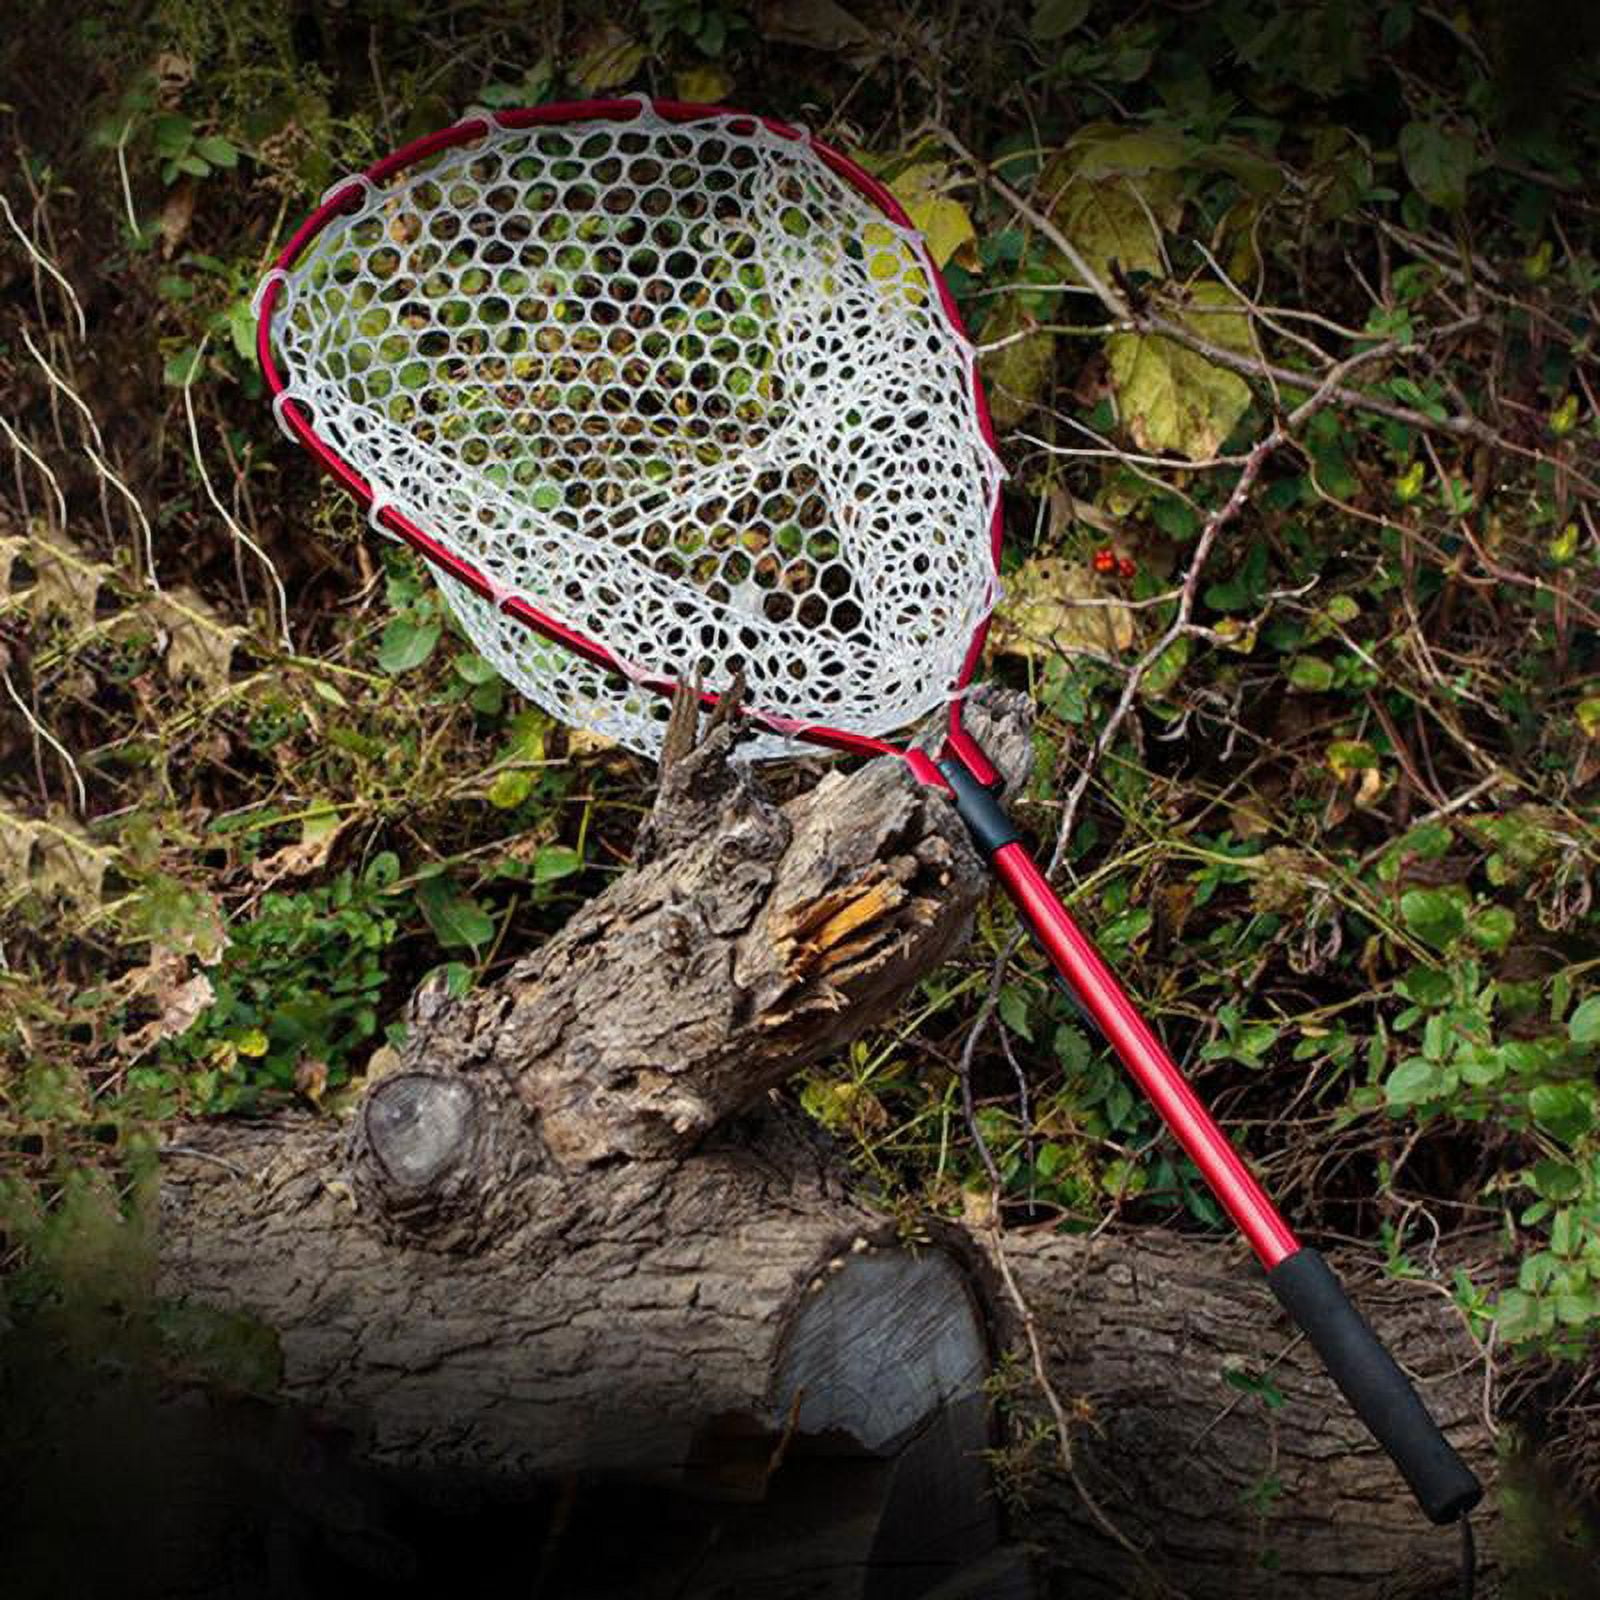 Fly Fishing Landing Net, Fish Net with Clear Soft Rubber Mesh or Waterproof  Nylon Mesh for Trout Fishing Catch and Release 